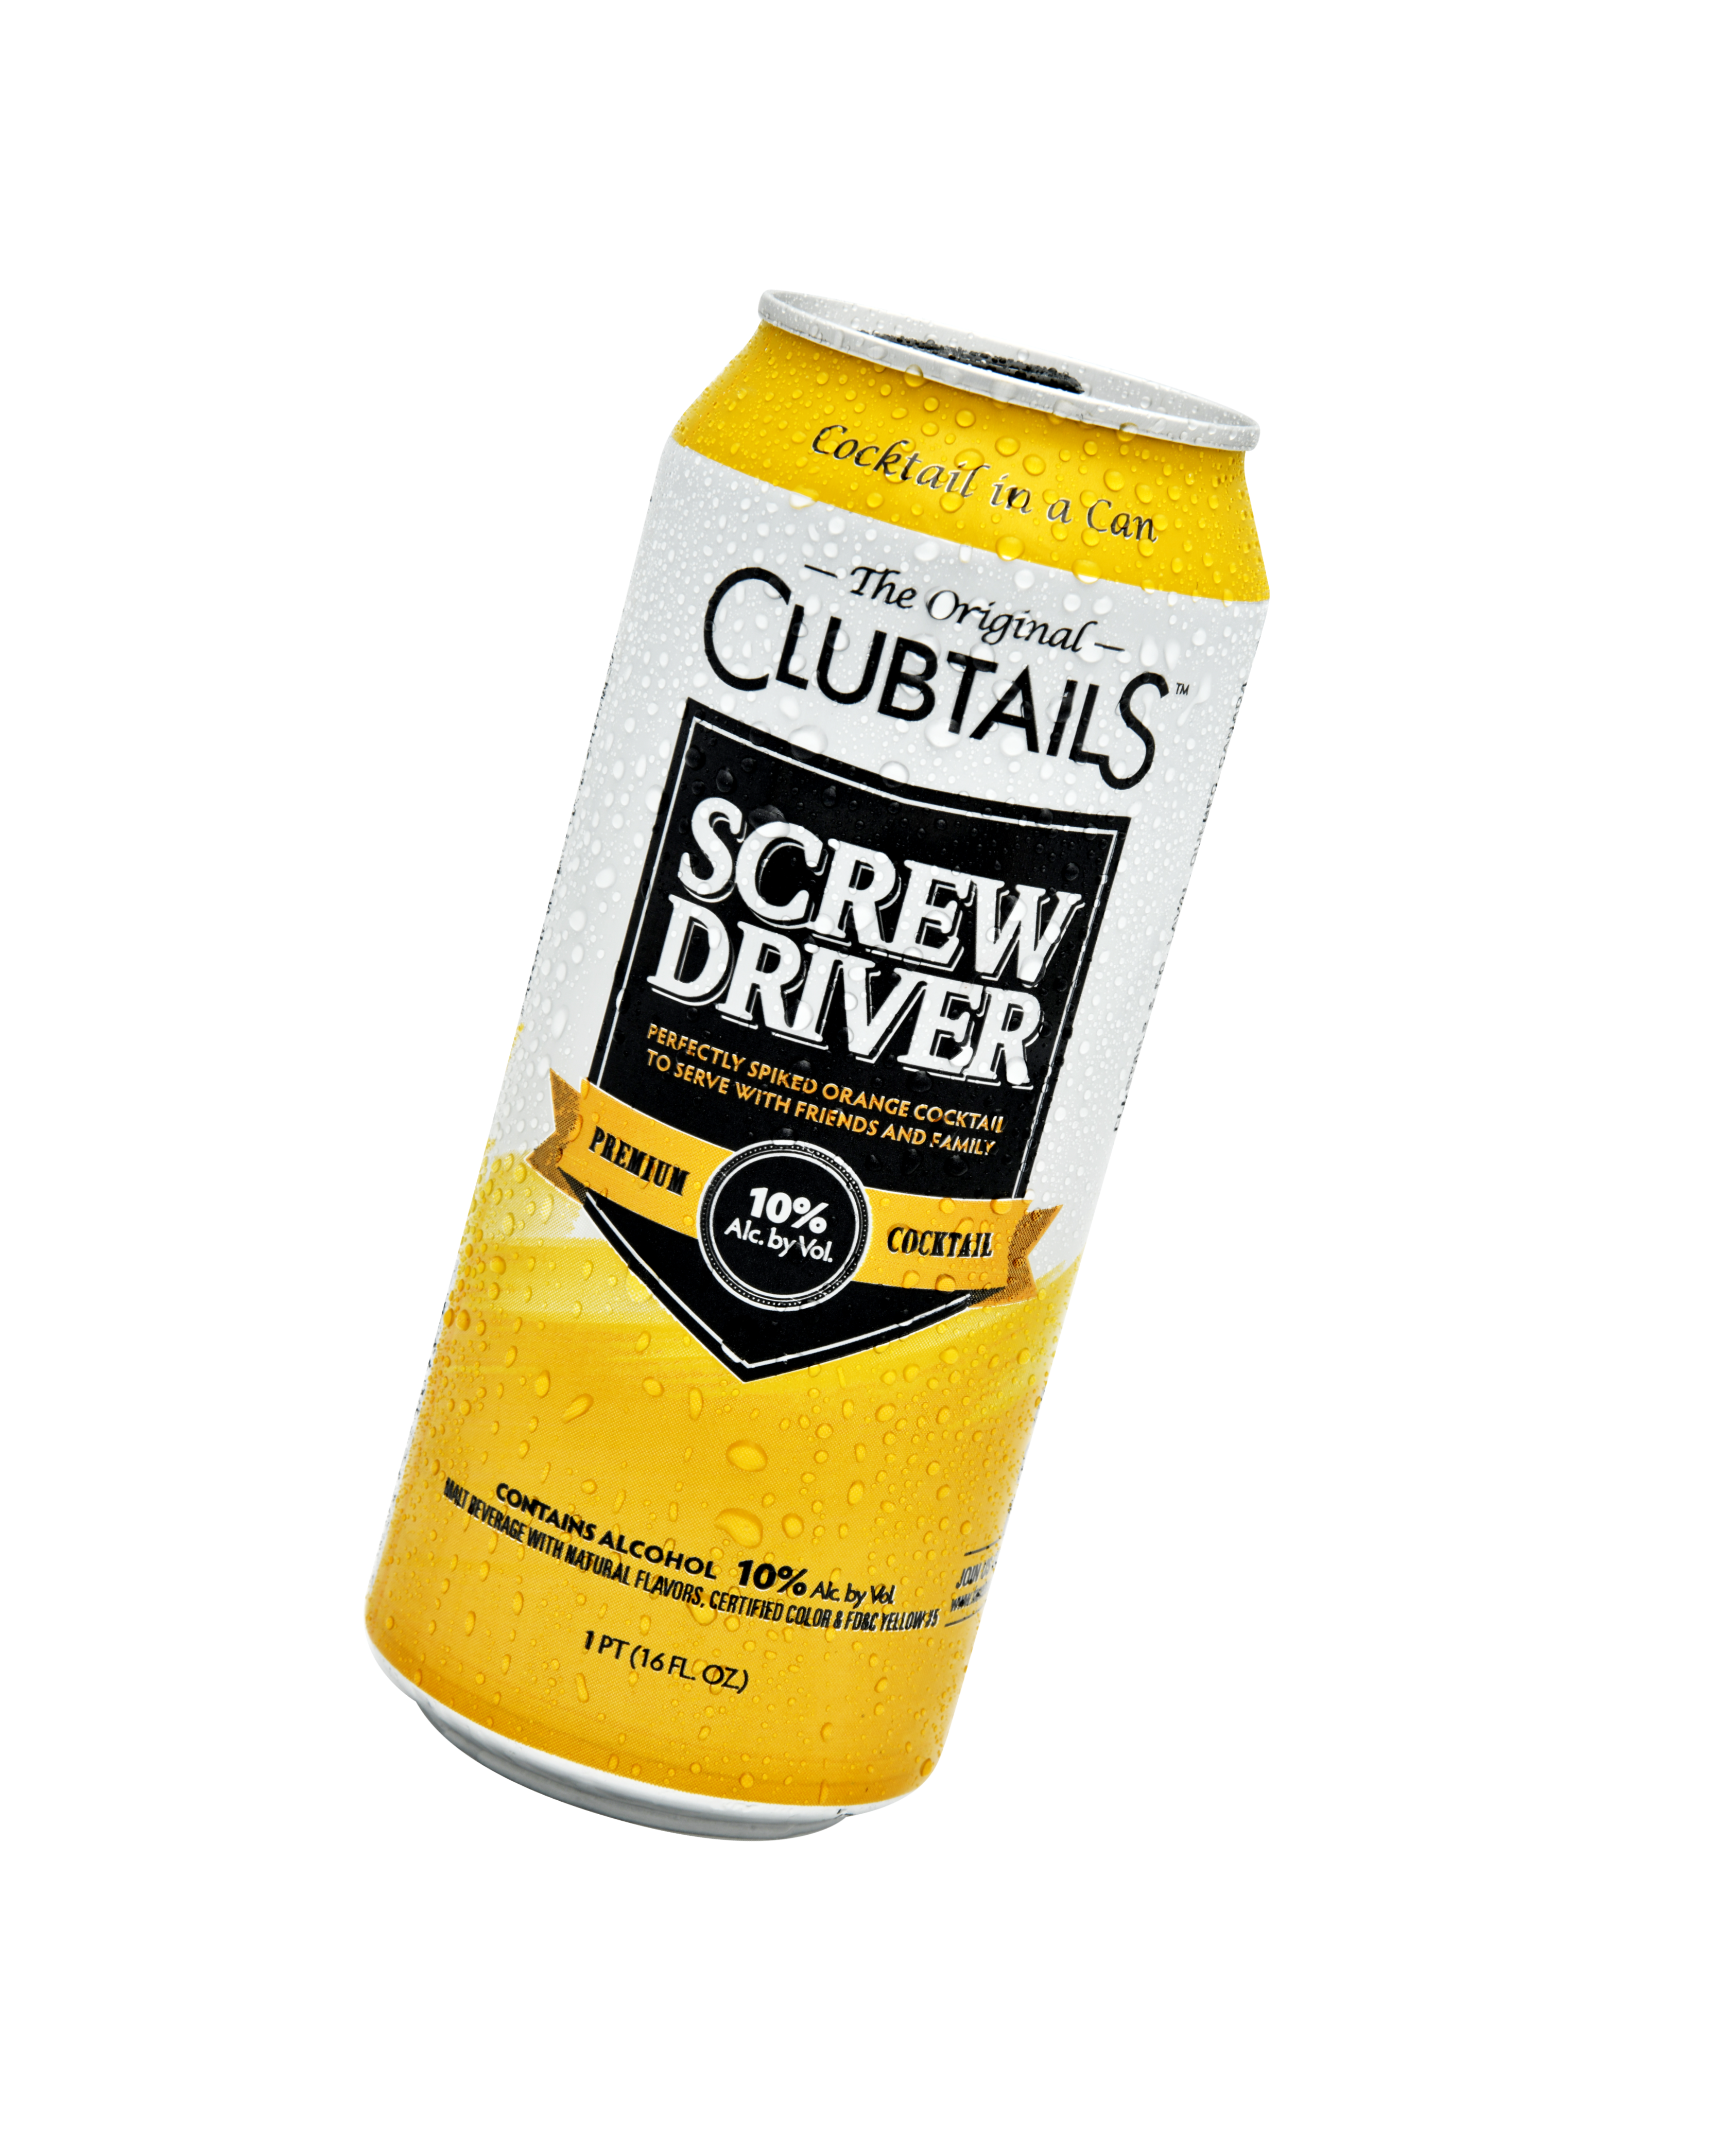 Screw Driver Clubtails Cocktail in a Can